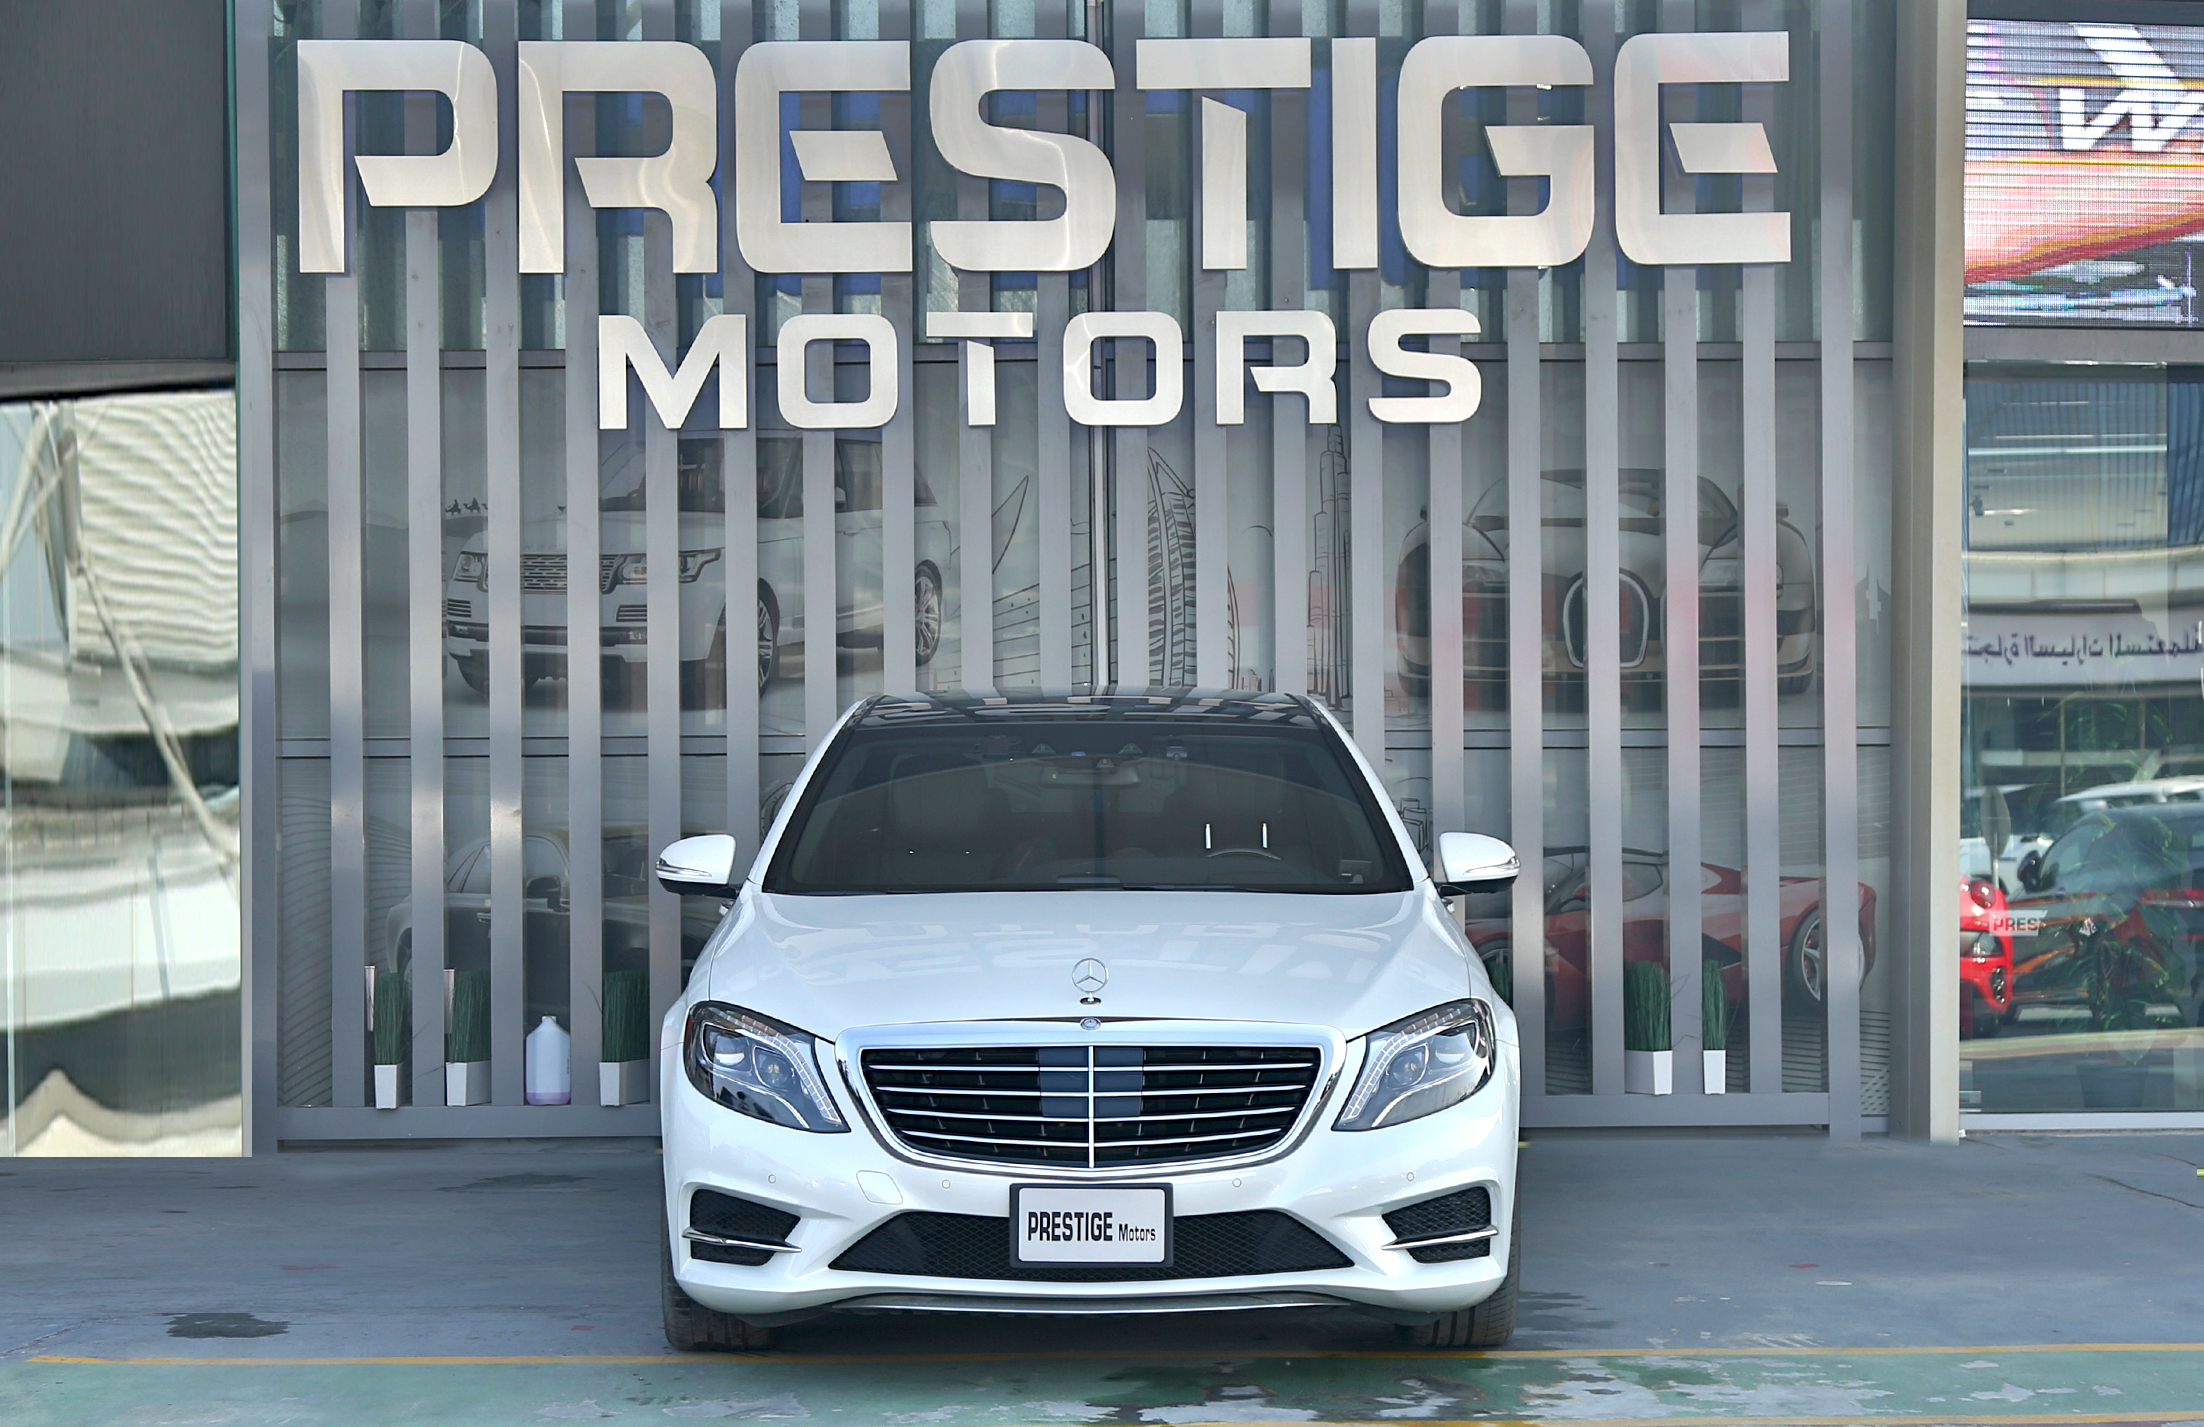 Mercedes-Benz S 550 2017 Perfect inside and out Prestige Motor Dubai